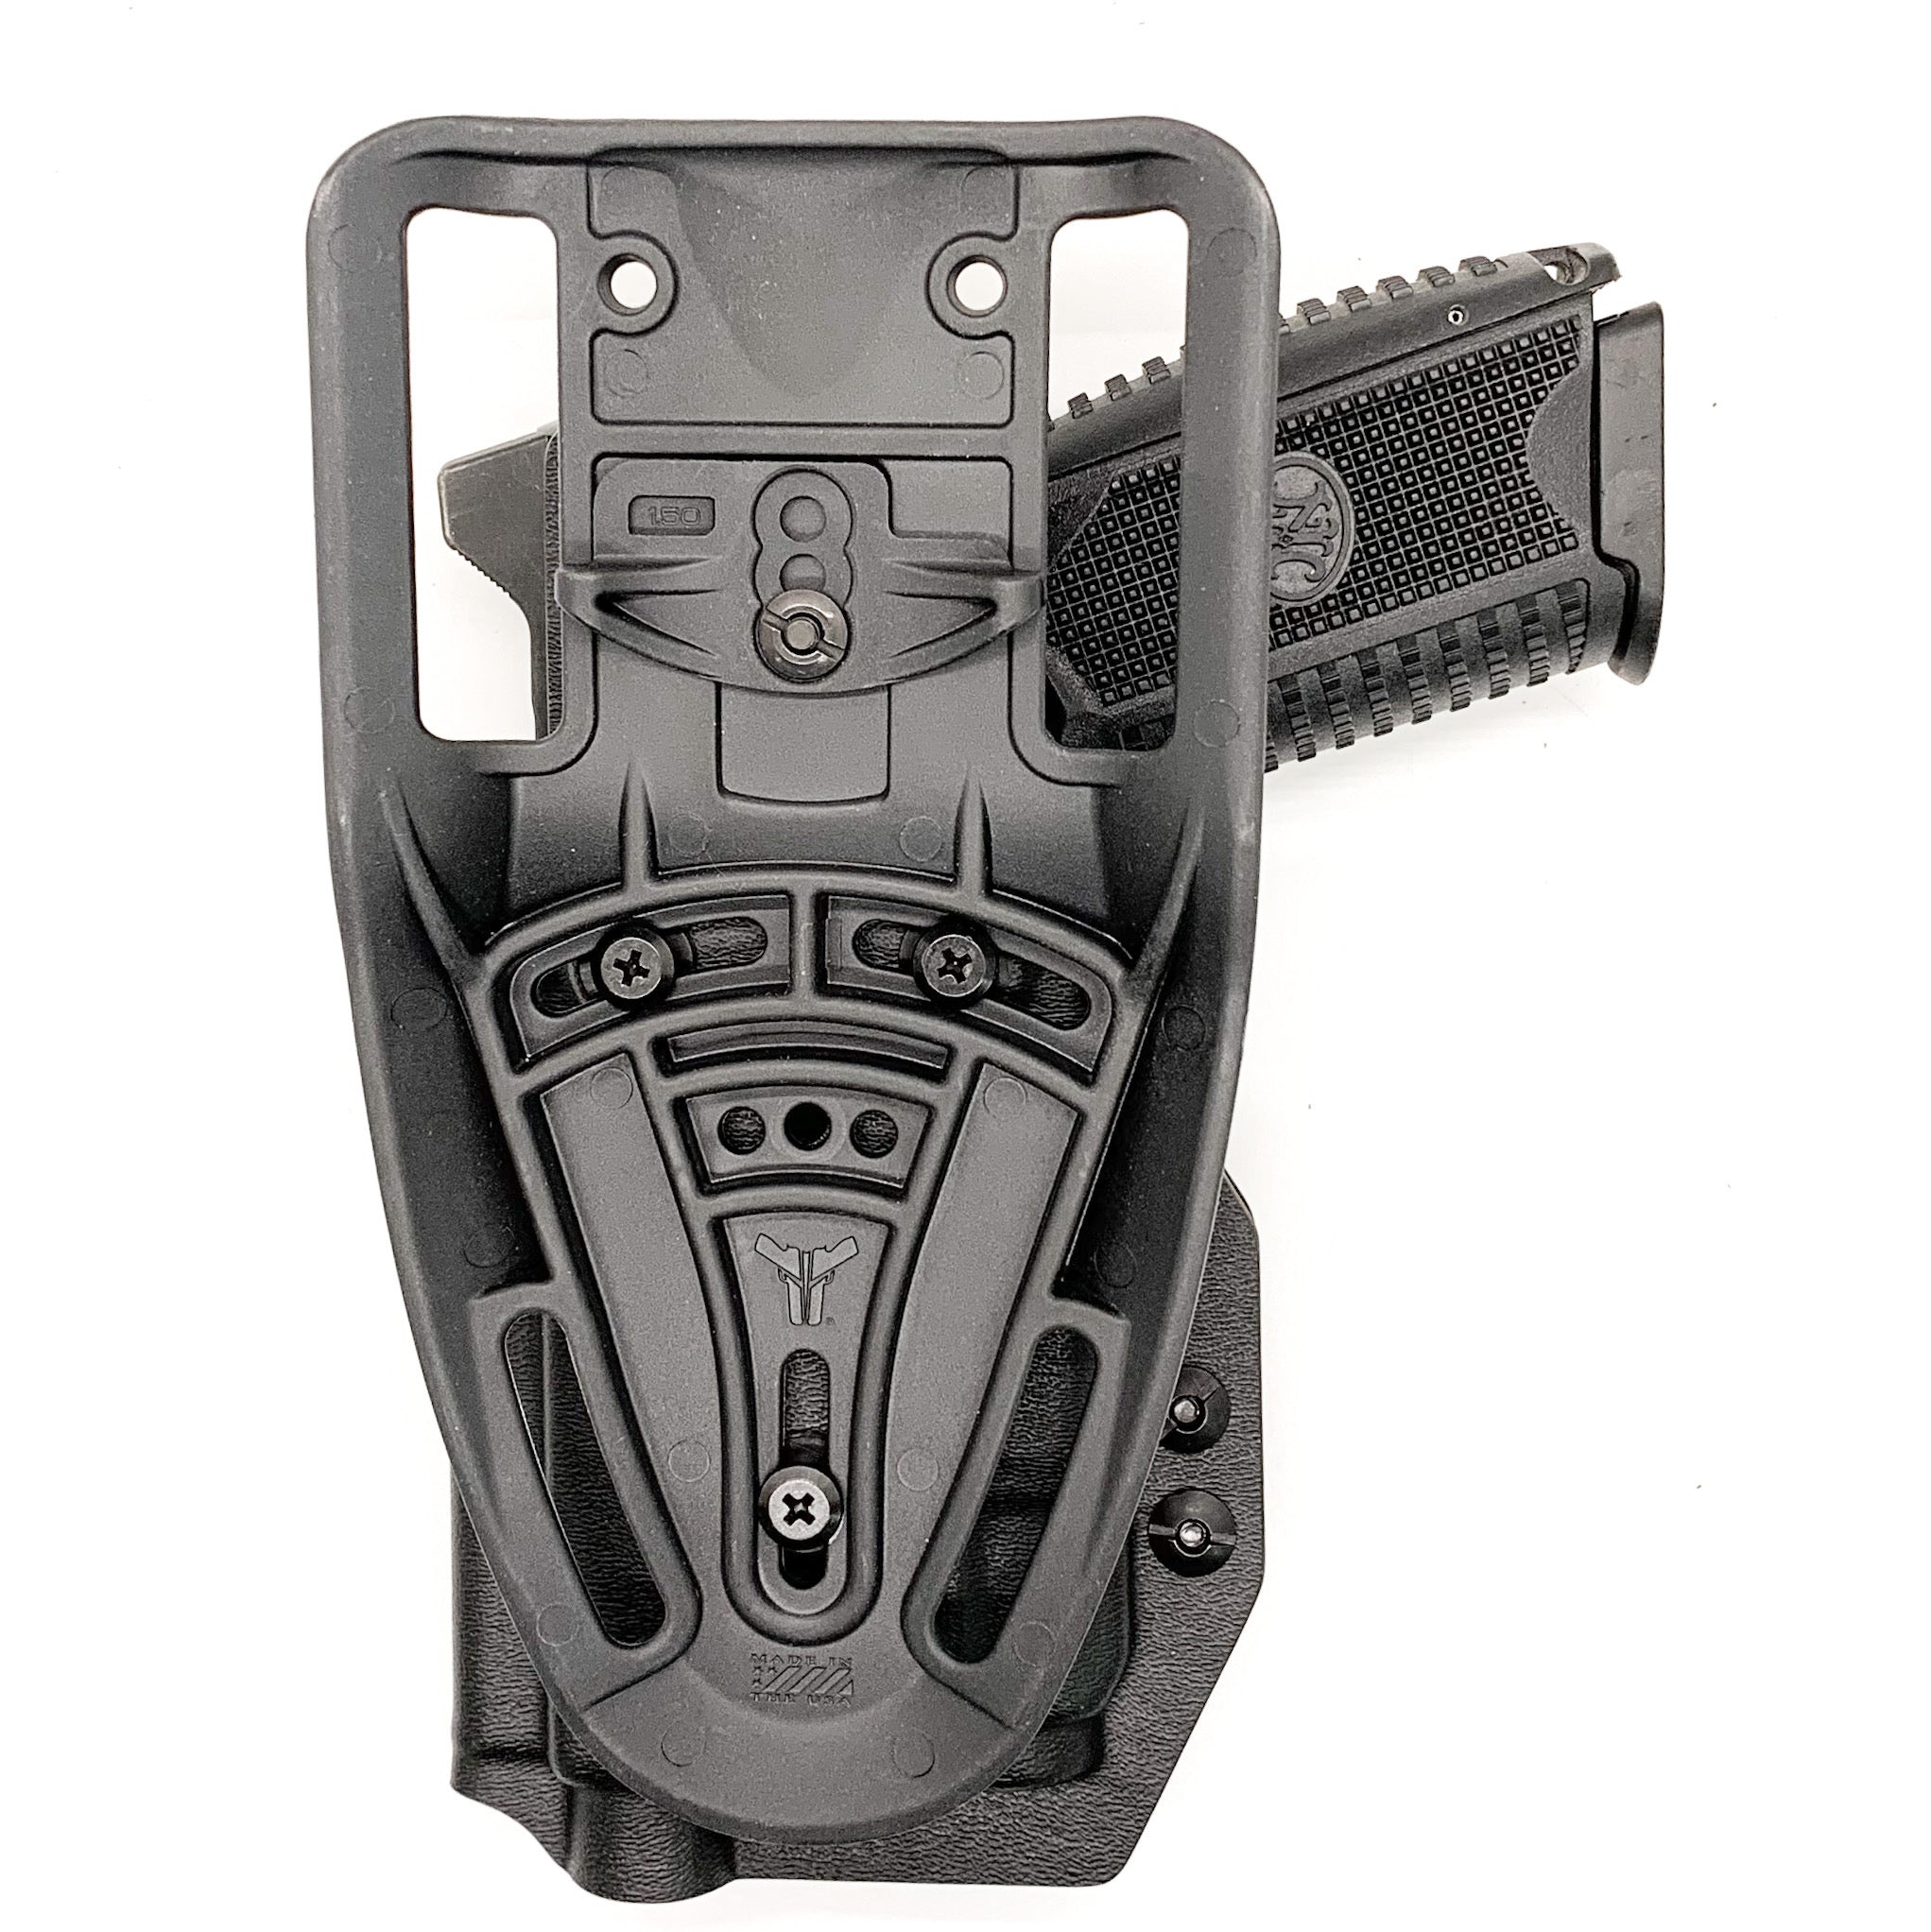 For the BEST, Outside Waistband OWB Kydex Duty and Competition style holster designed to fit the FN 509 compact, 509, 509 Tactical with the Streamlight TLR-7 on the handgun, shop Four Brothers Holsters. Open muzzle, Full sweat guard, adjustable retention, cleared for red dot sights. Made in USA 4BROS Holster 